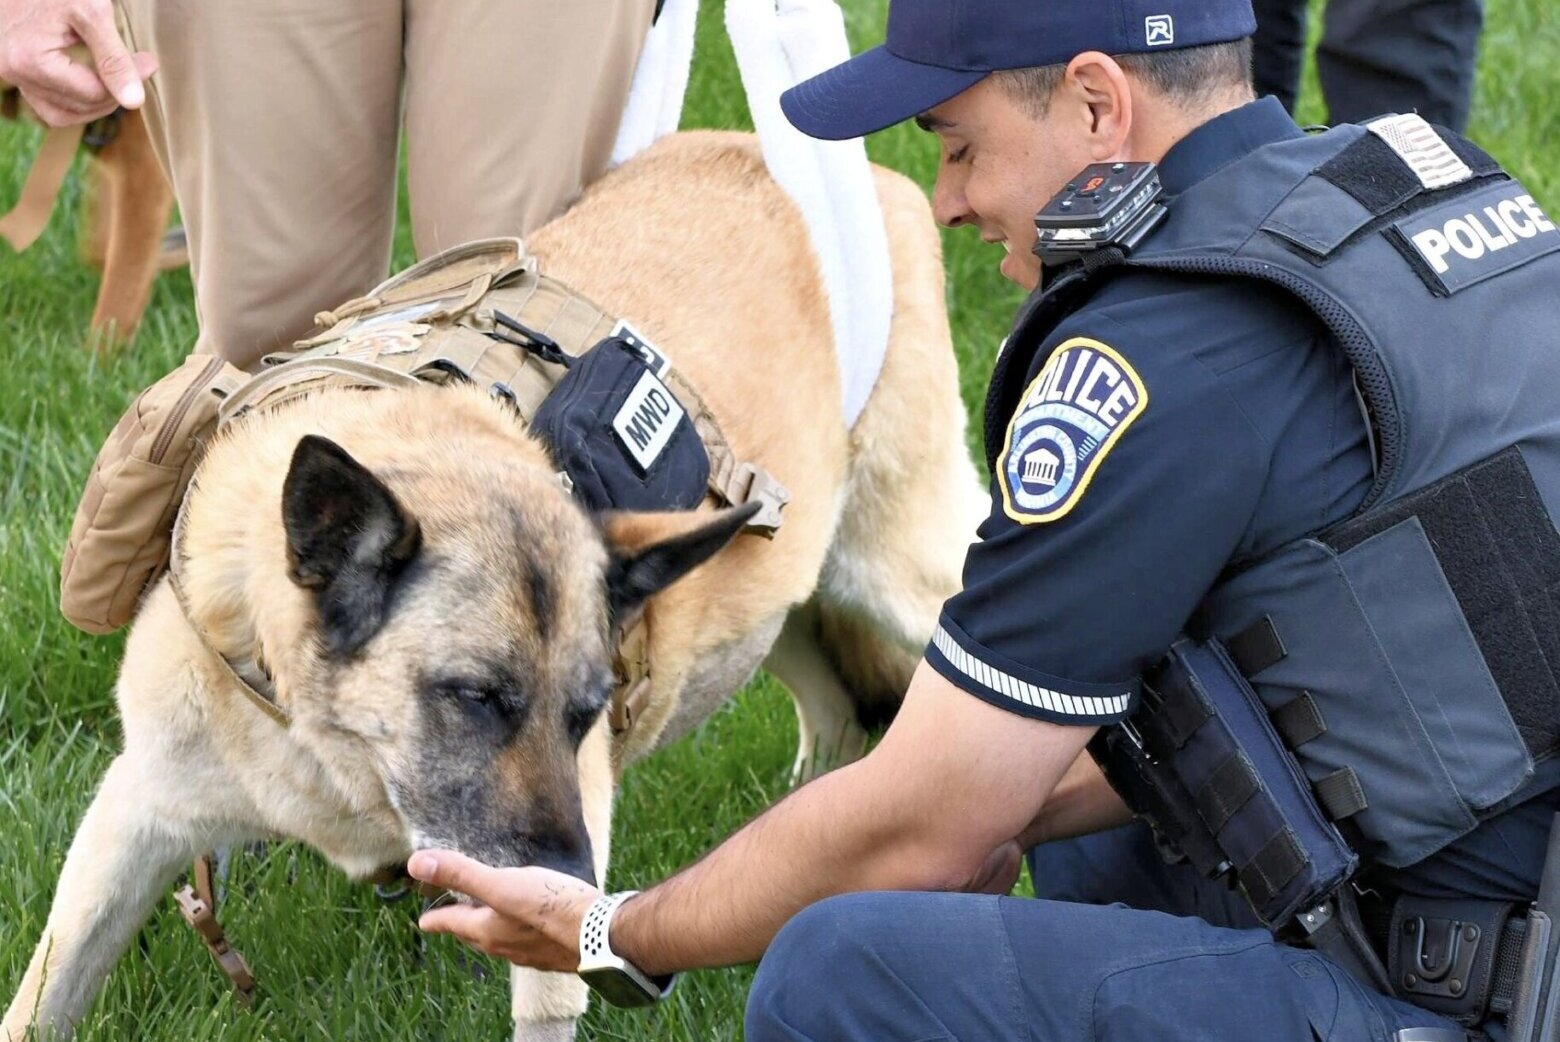 In his final days, Arlington County Police hold a procession for a local  dog that served in Afghanistan - WTOP News